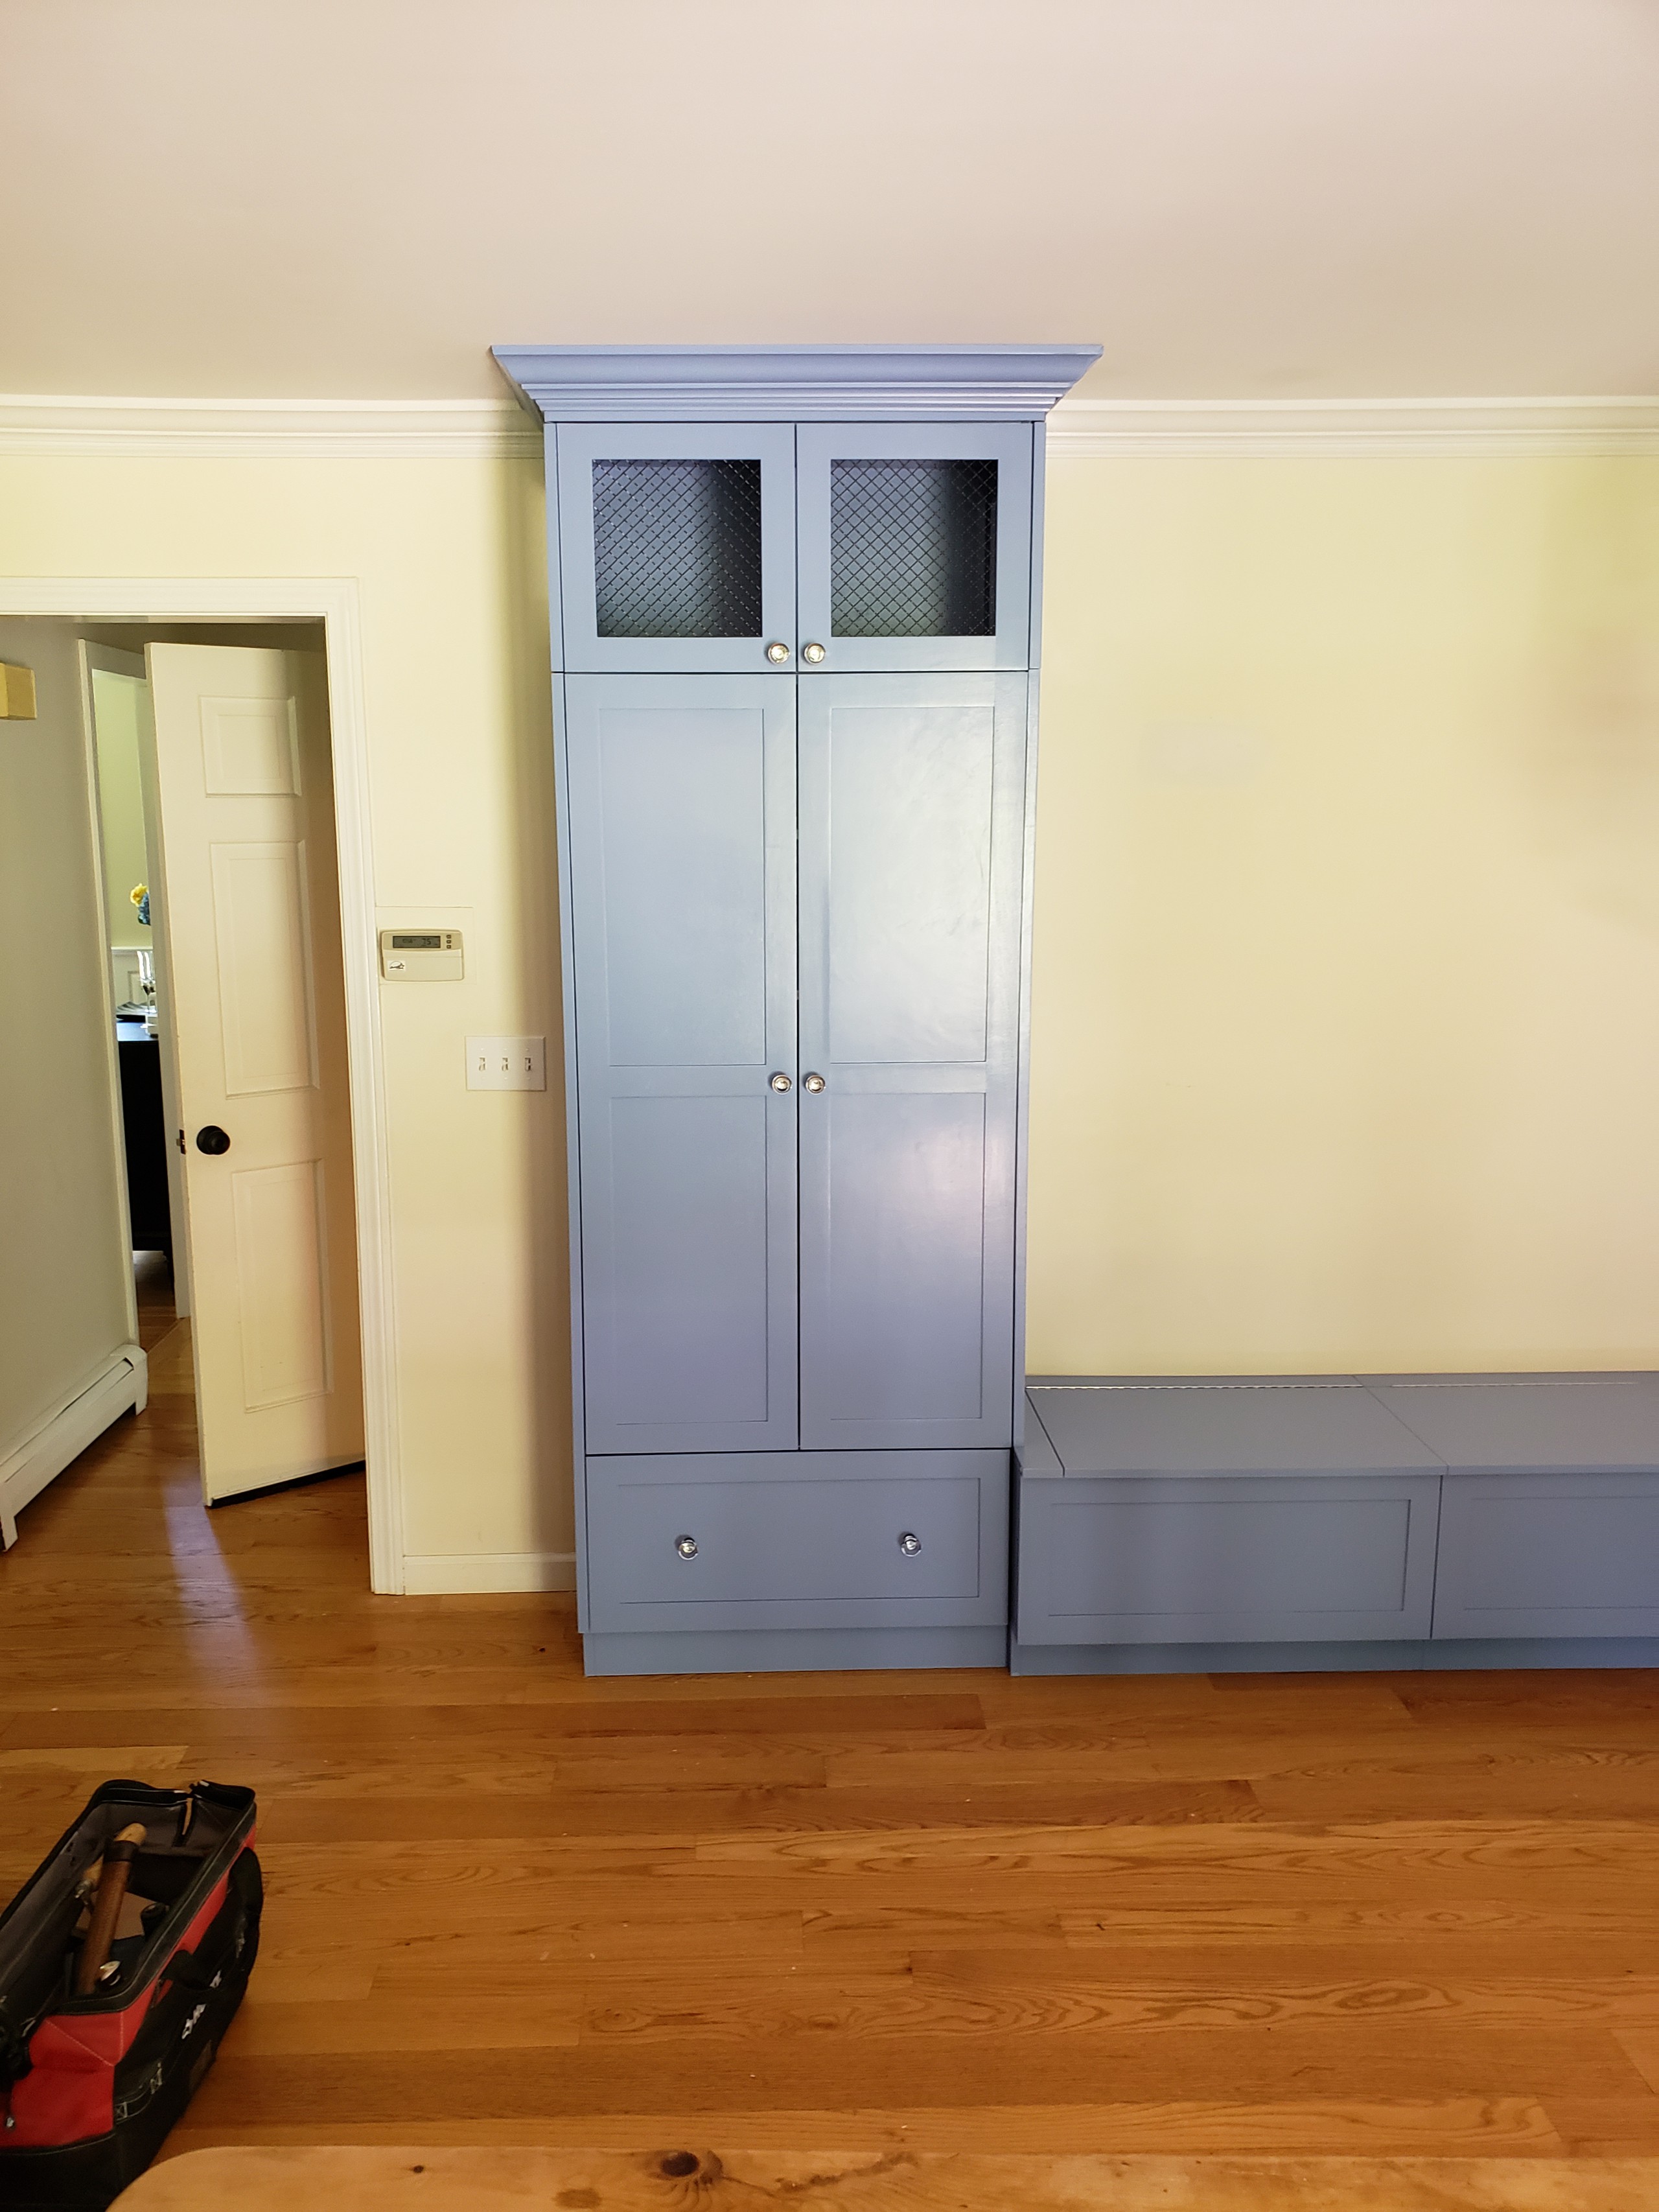 Steel Blue Banquette and storage unit